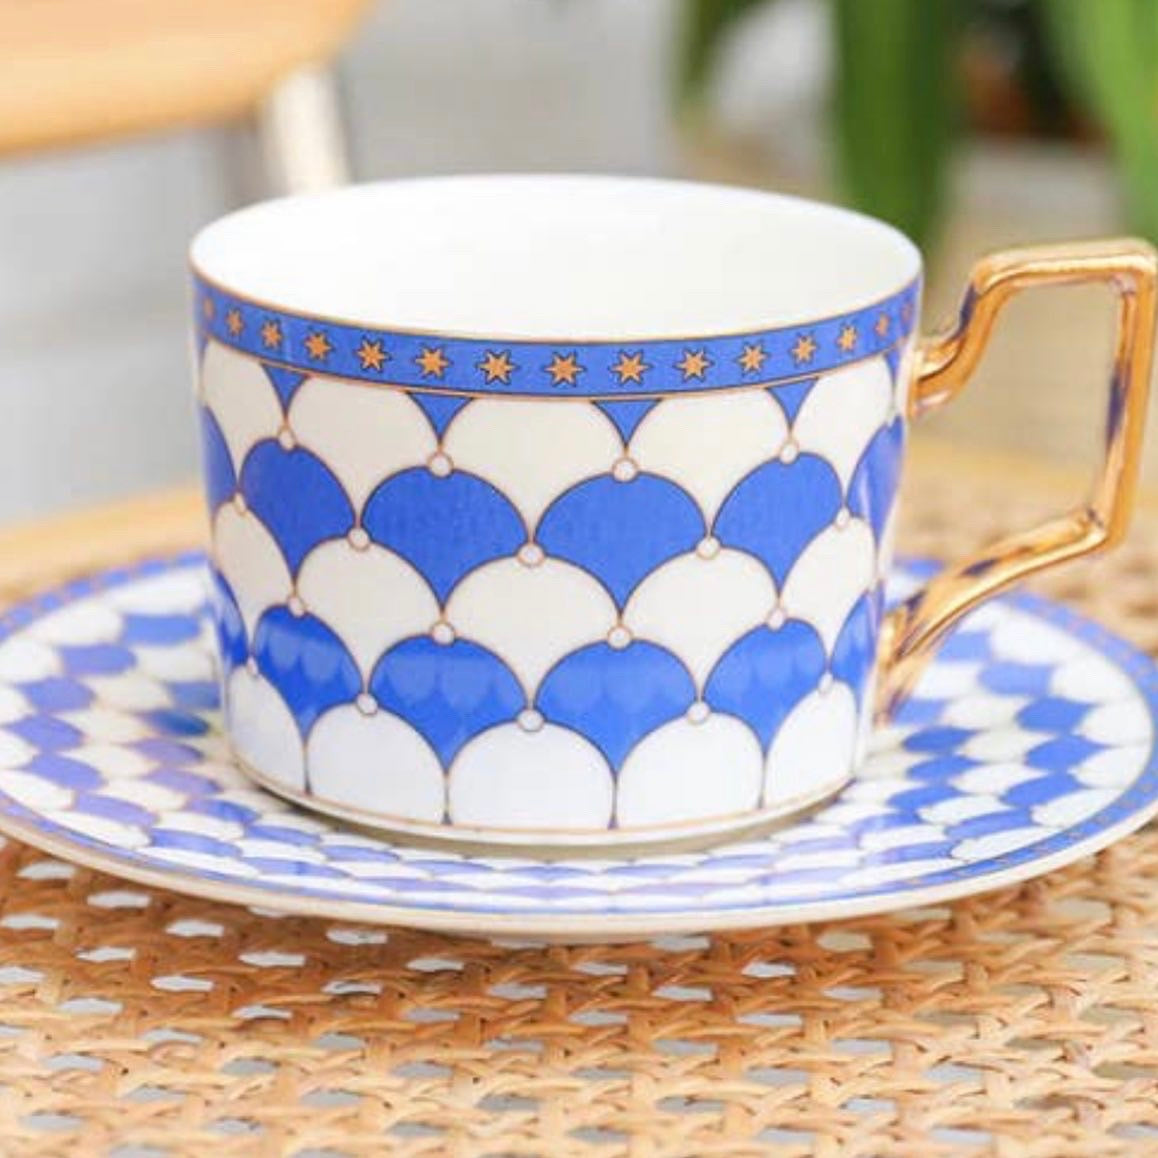 ART DECO DESIGNED CUP AND SAUCER